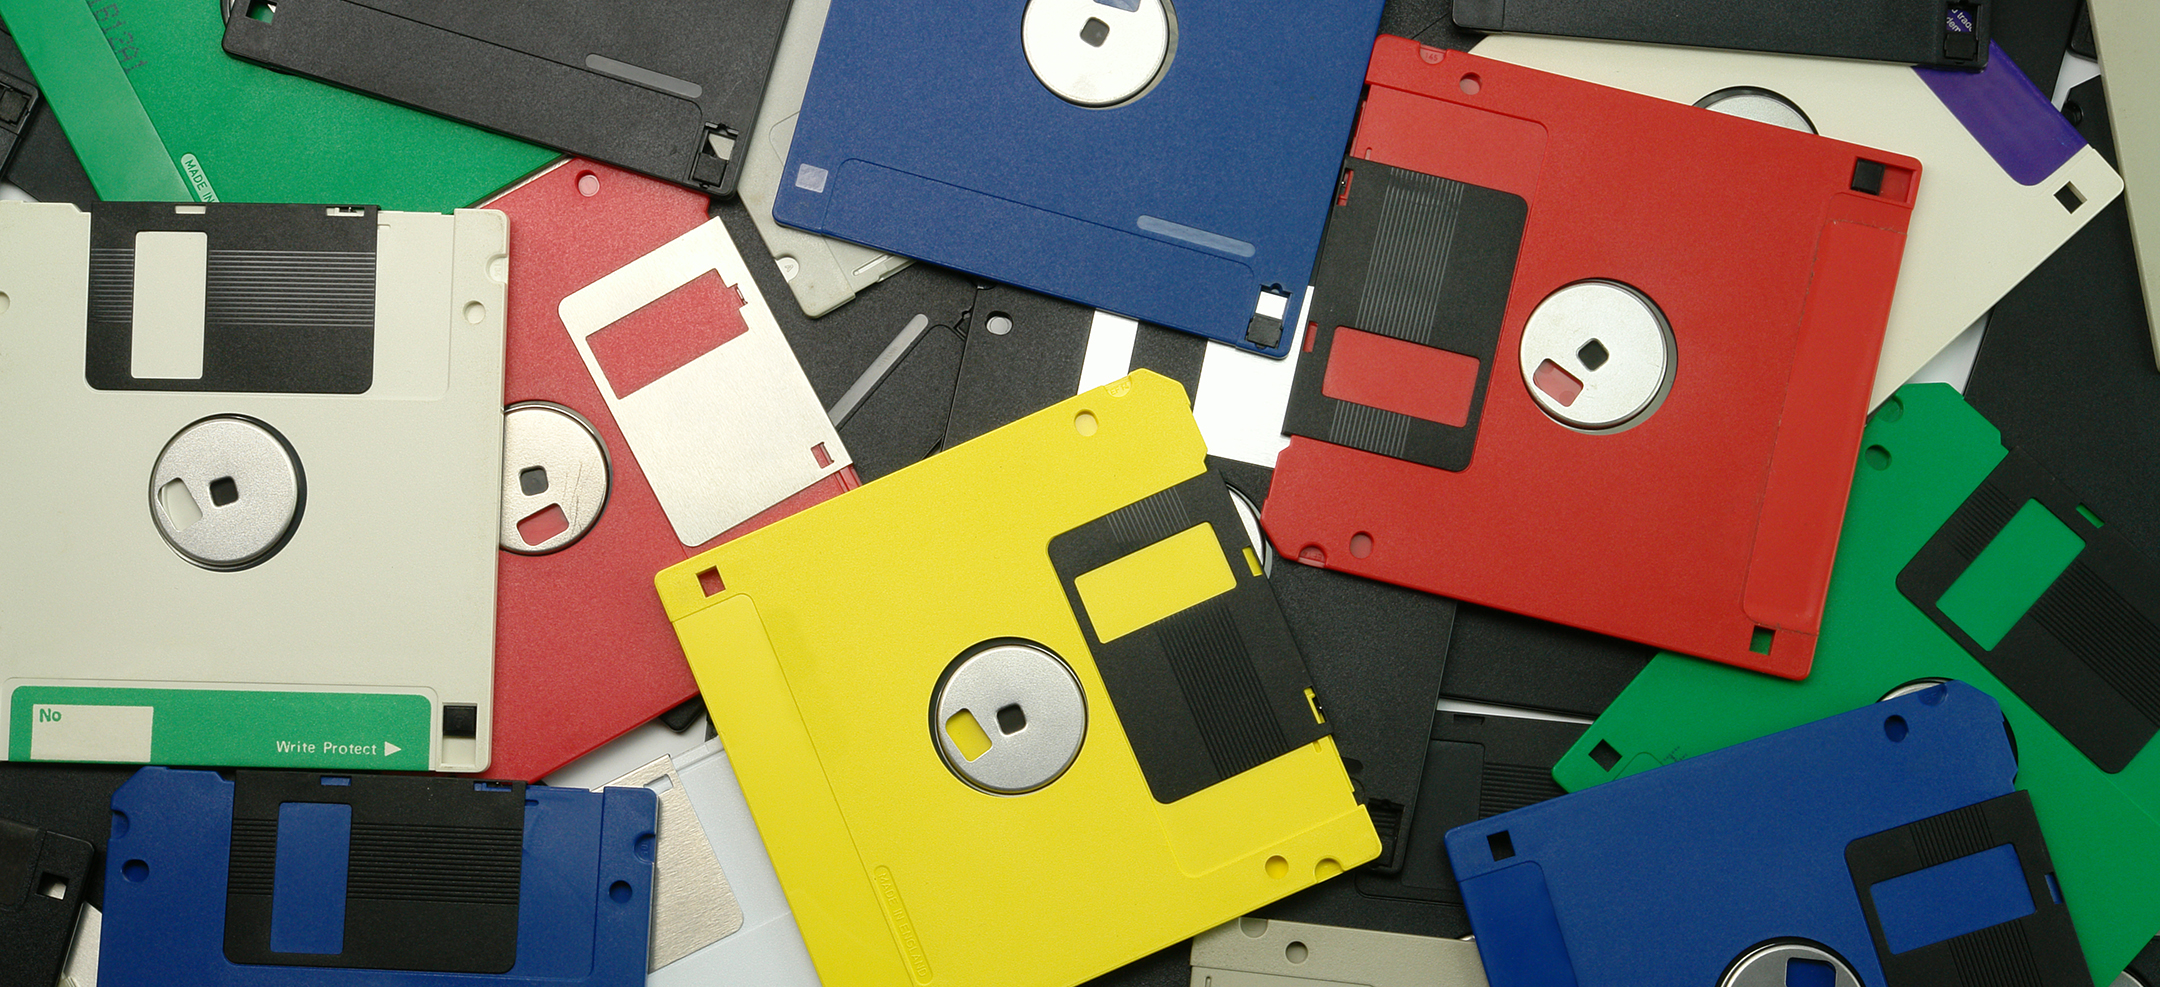 vintage floppy 3.5-inch disks in various colors spread out on a table, top view